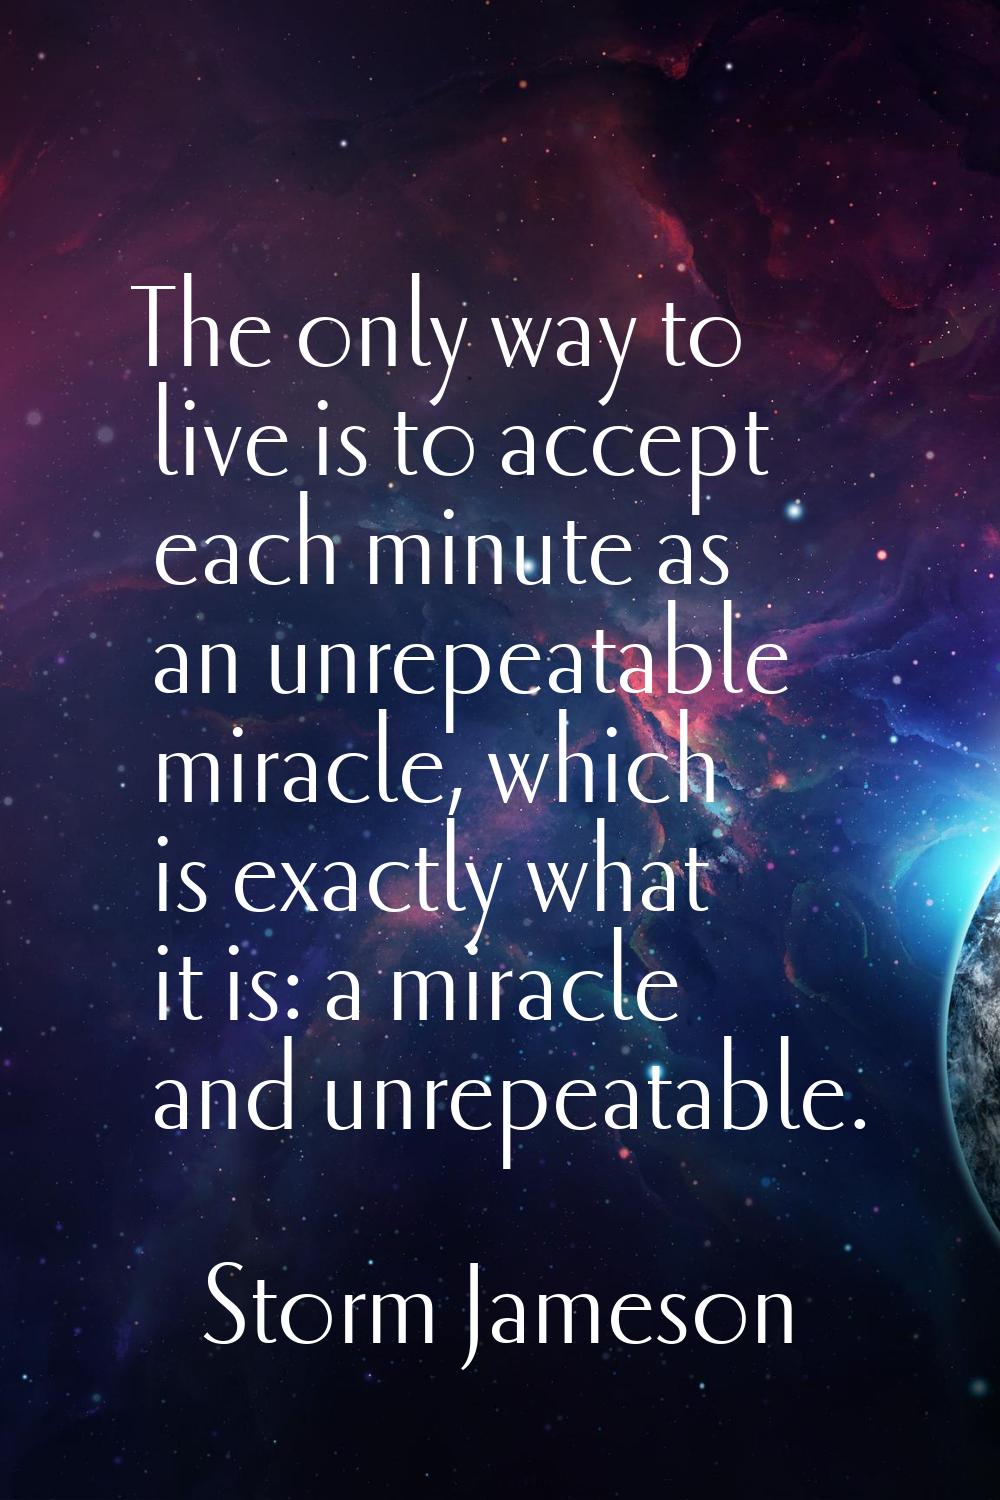 The only way to live is to accept each minute as an unrepeatable miracle, which is exactly what it 